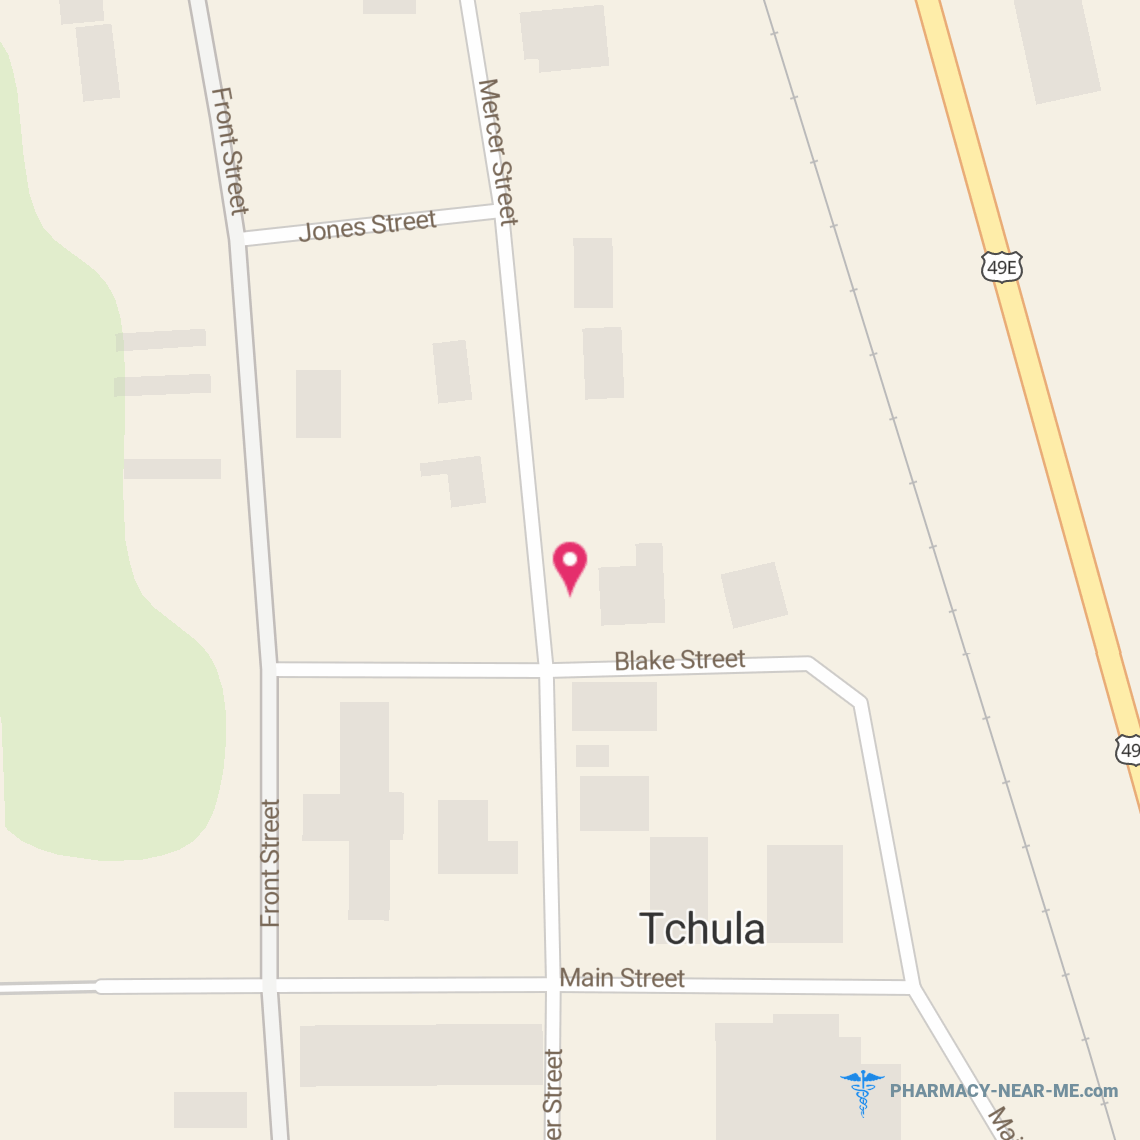 HAIRE DRUG CENTER - Pharmacy Hours, Phone, Reviews & Information: 112 Mercer Street, Tchula, Mississippi 39169, United States